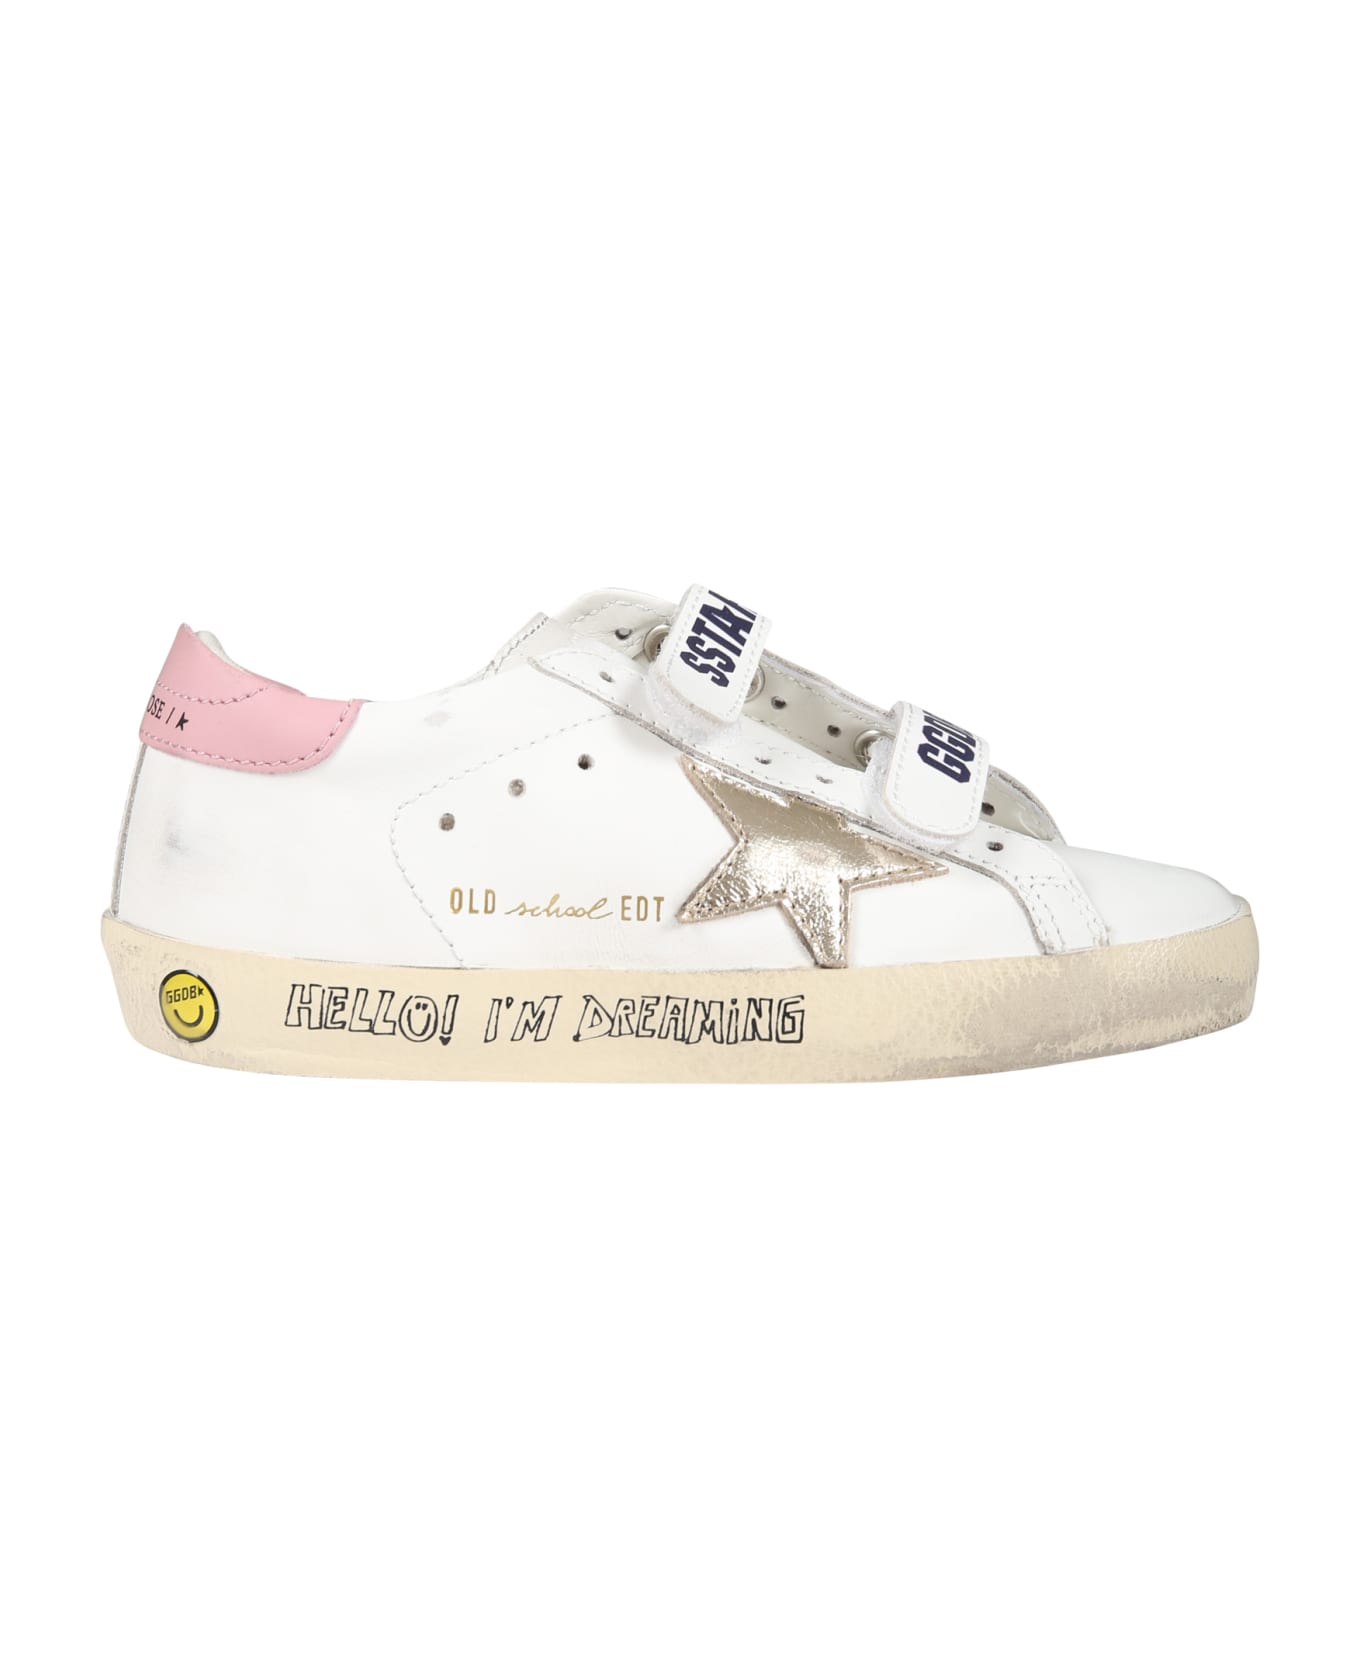 Golden Goose White Sneakers For Girl With Star - White